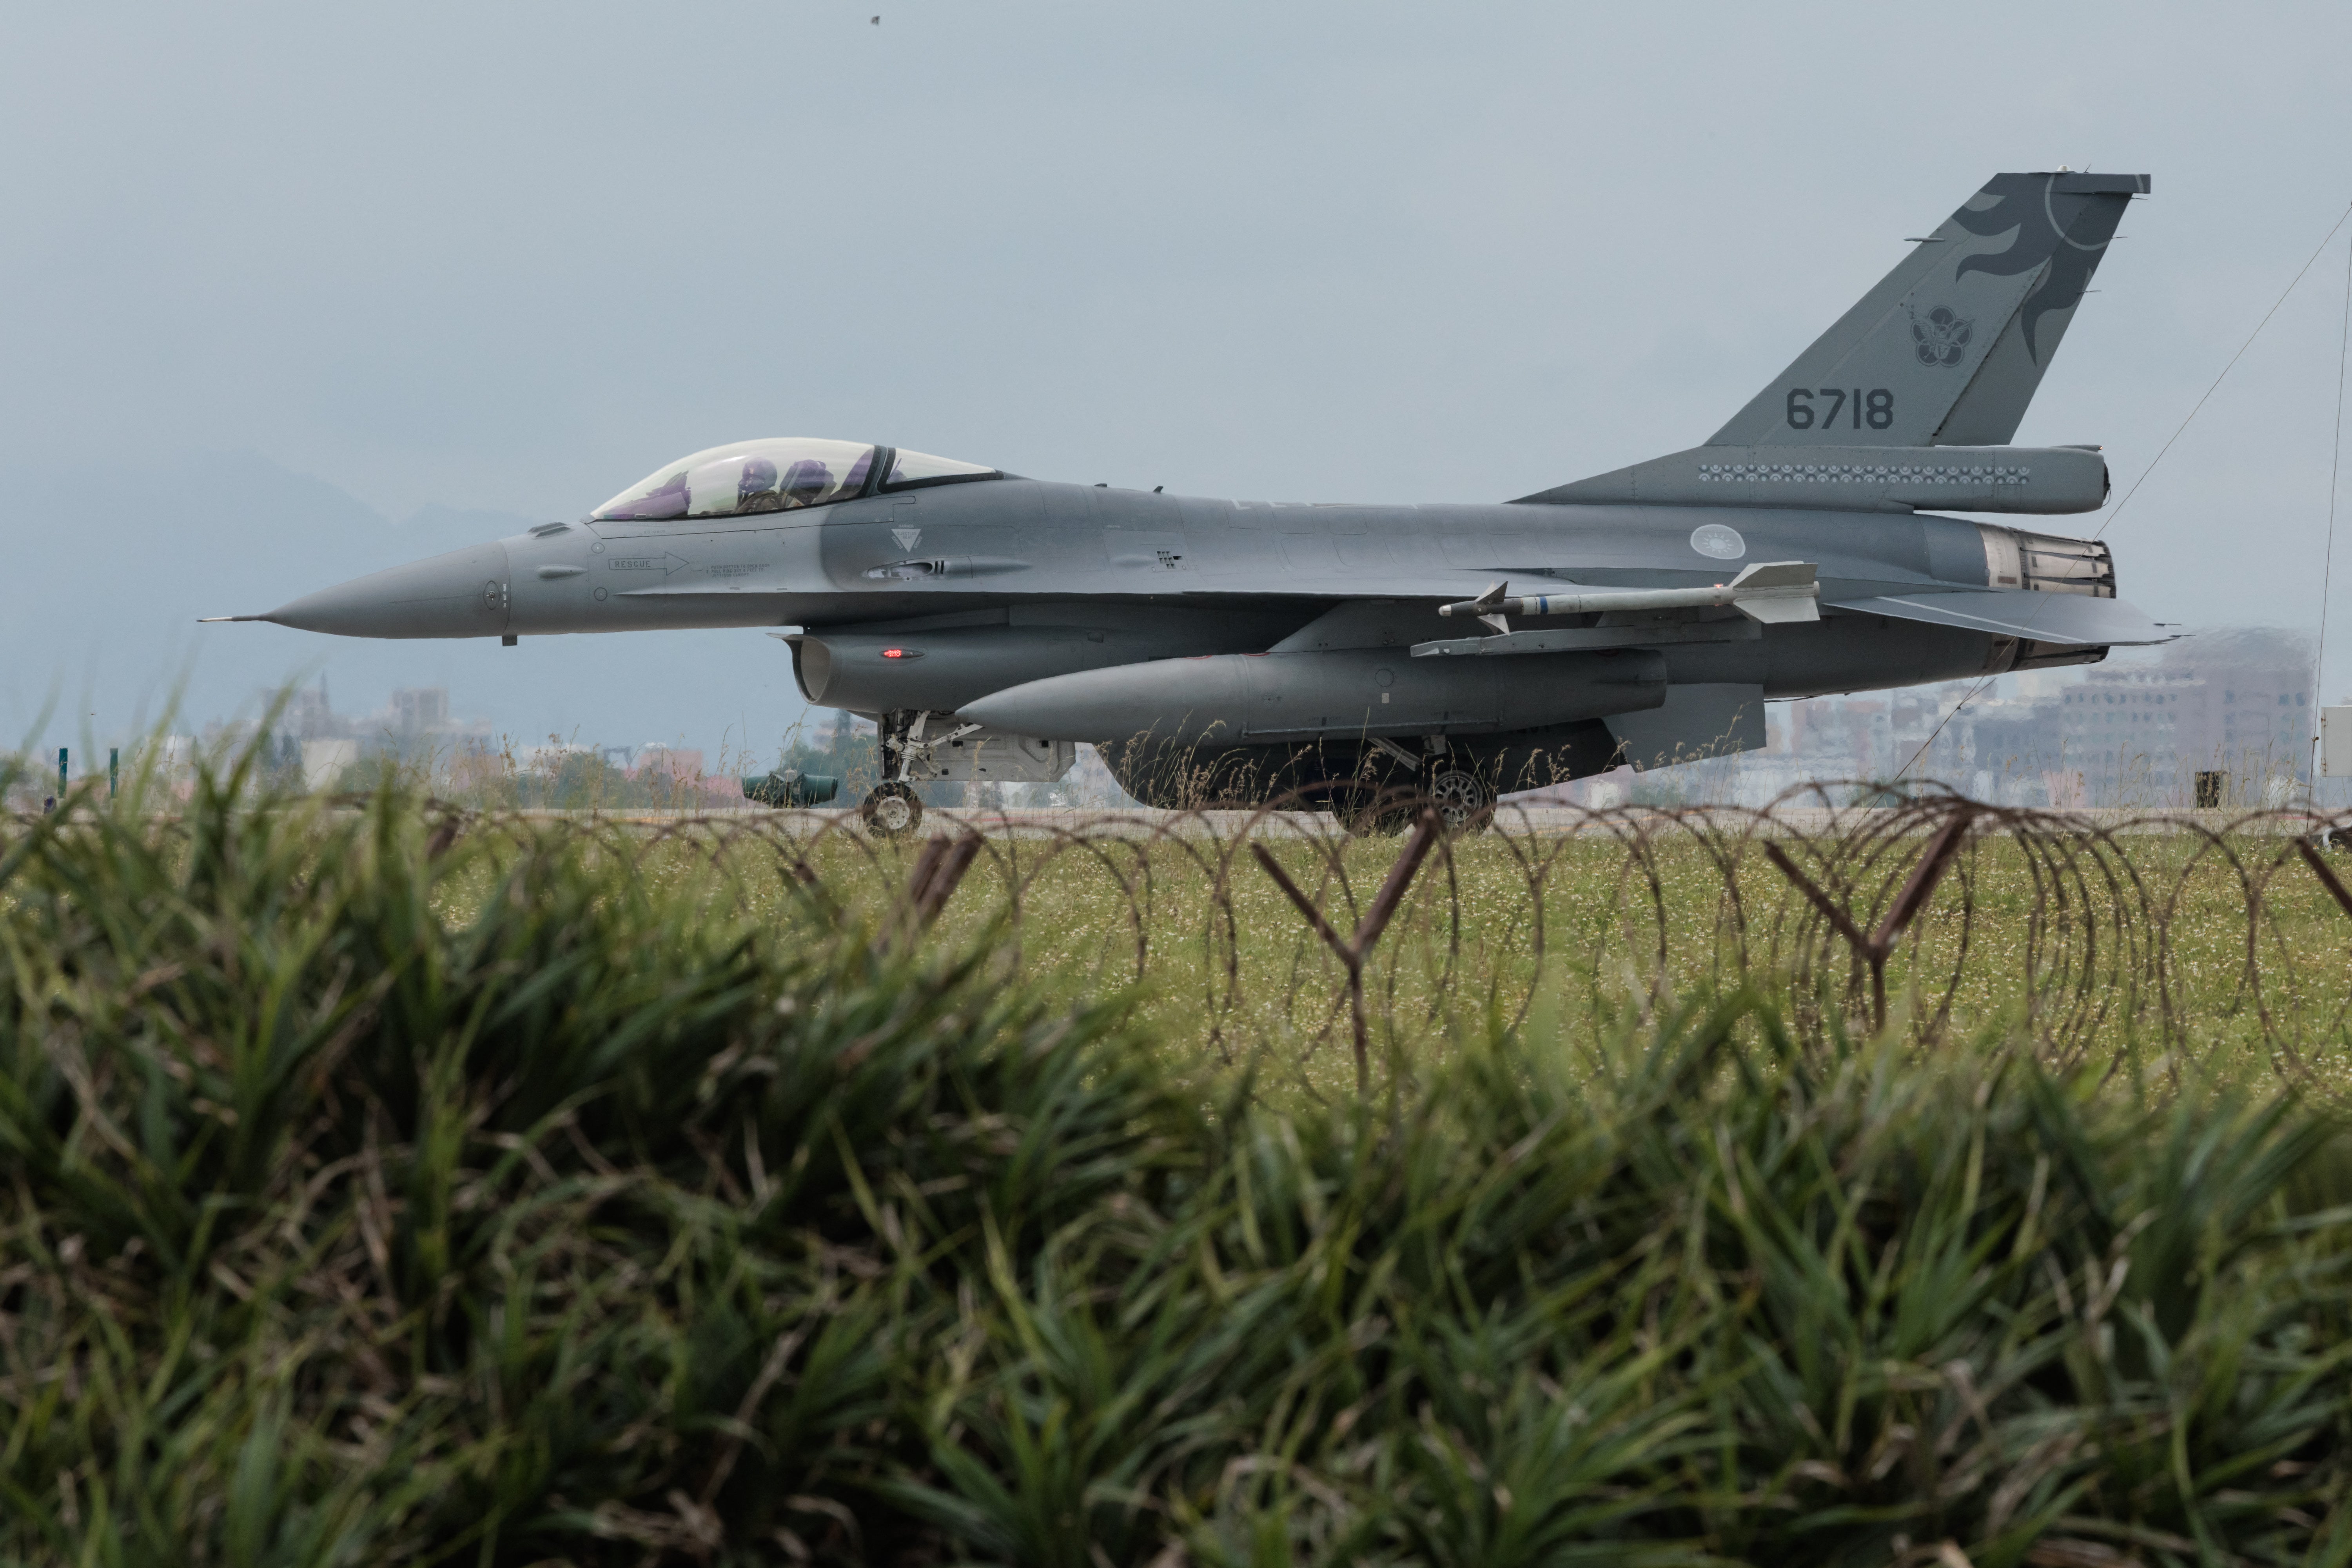 A Taiwanese Air Force F-16 fighter jet taxis after landing at an air force base in Hualien in eastern Taiwan